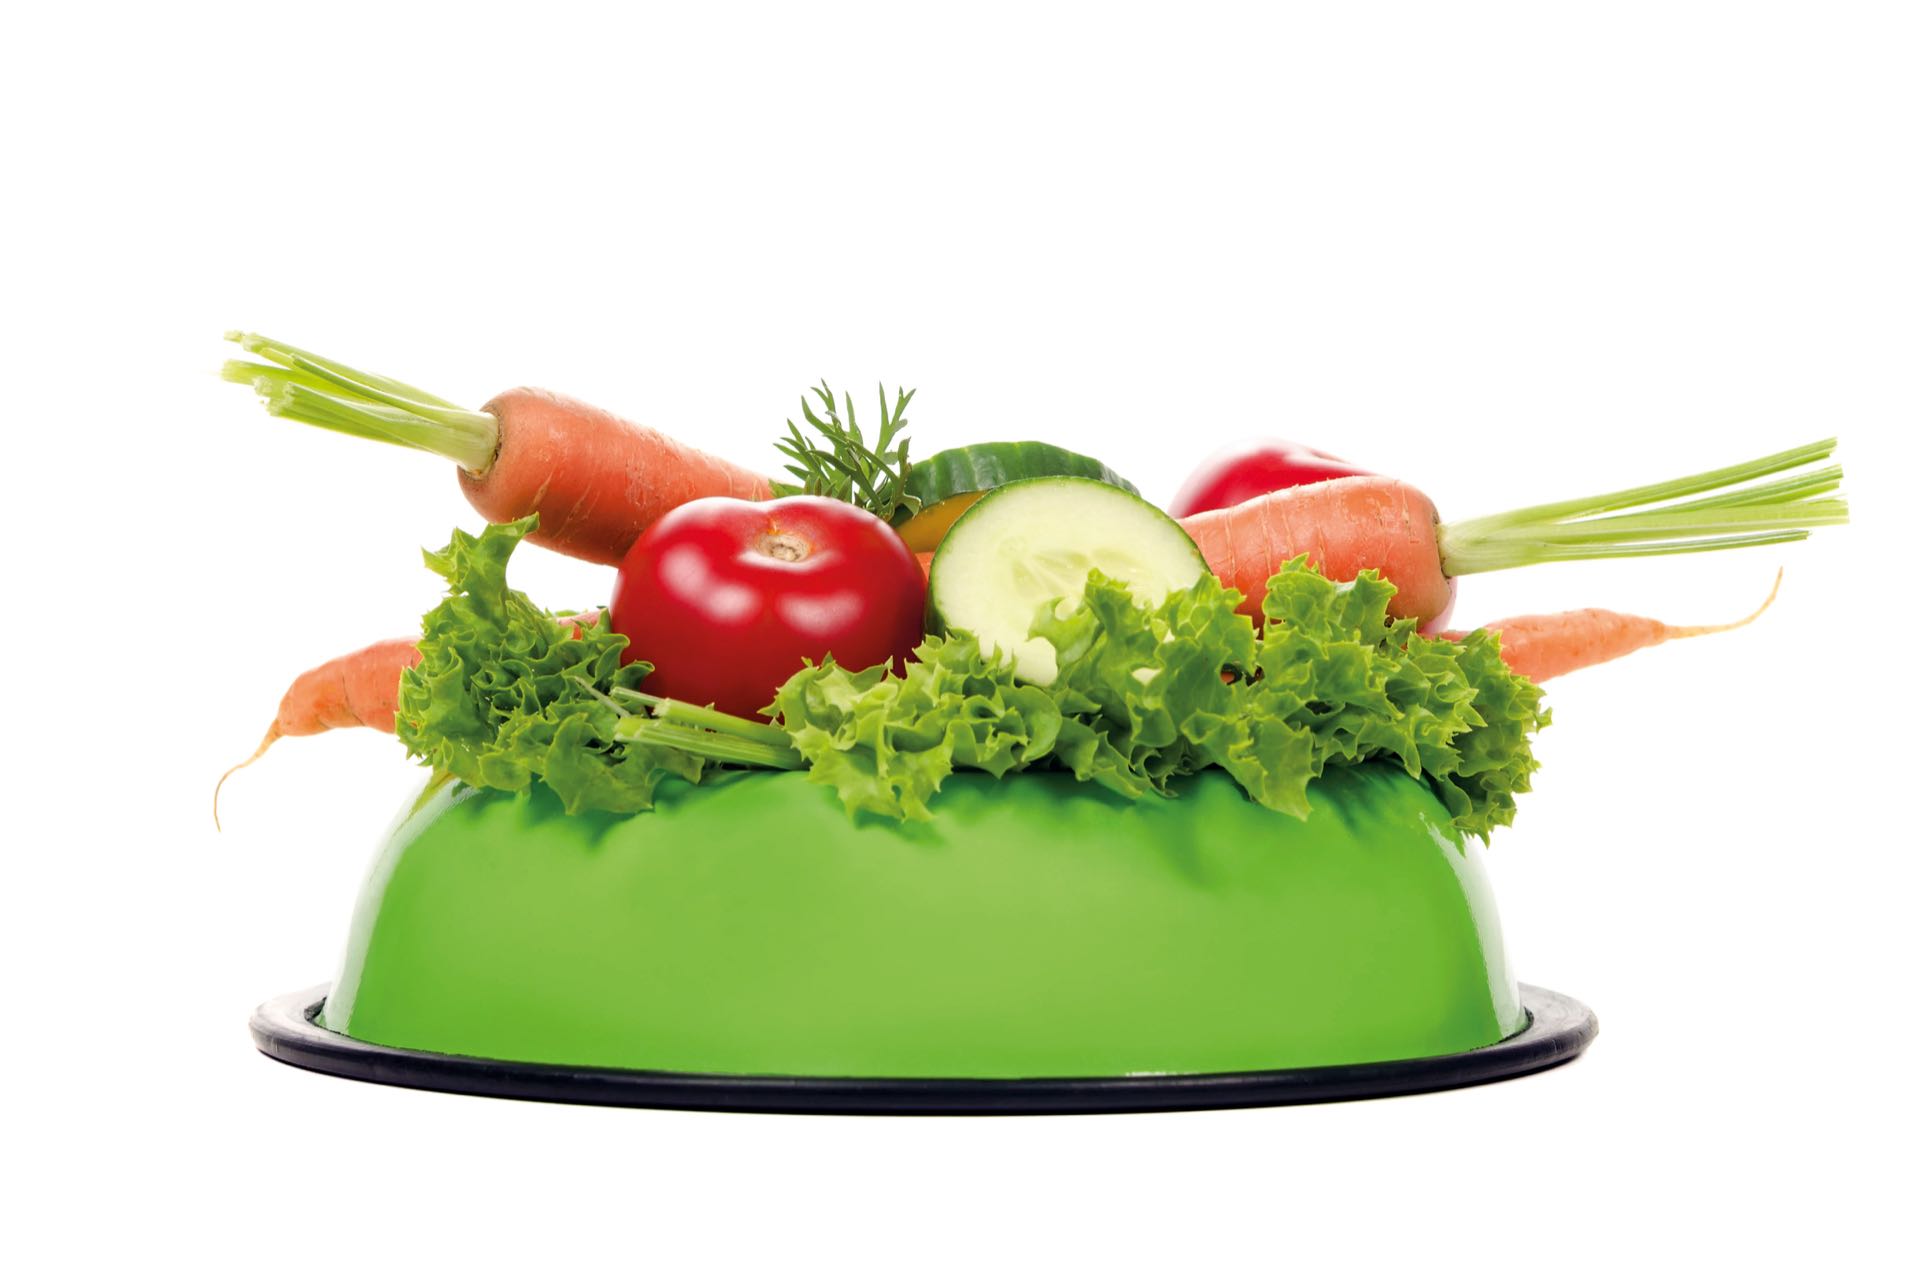 a feeding bowl full of salad and vegetables before white background